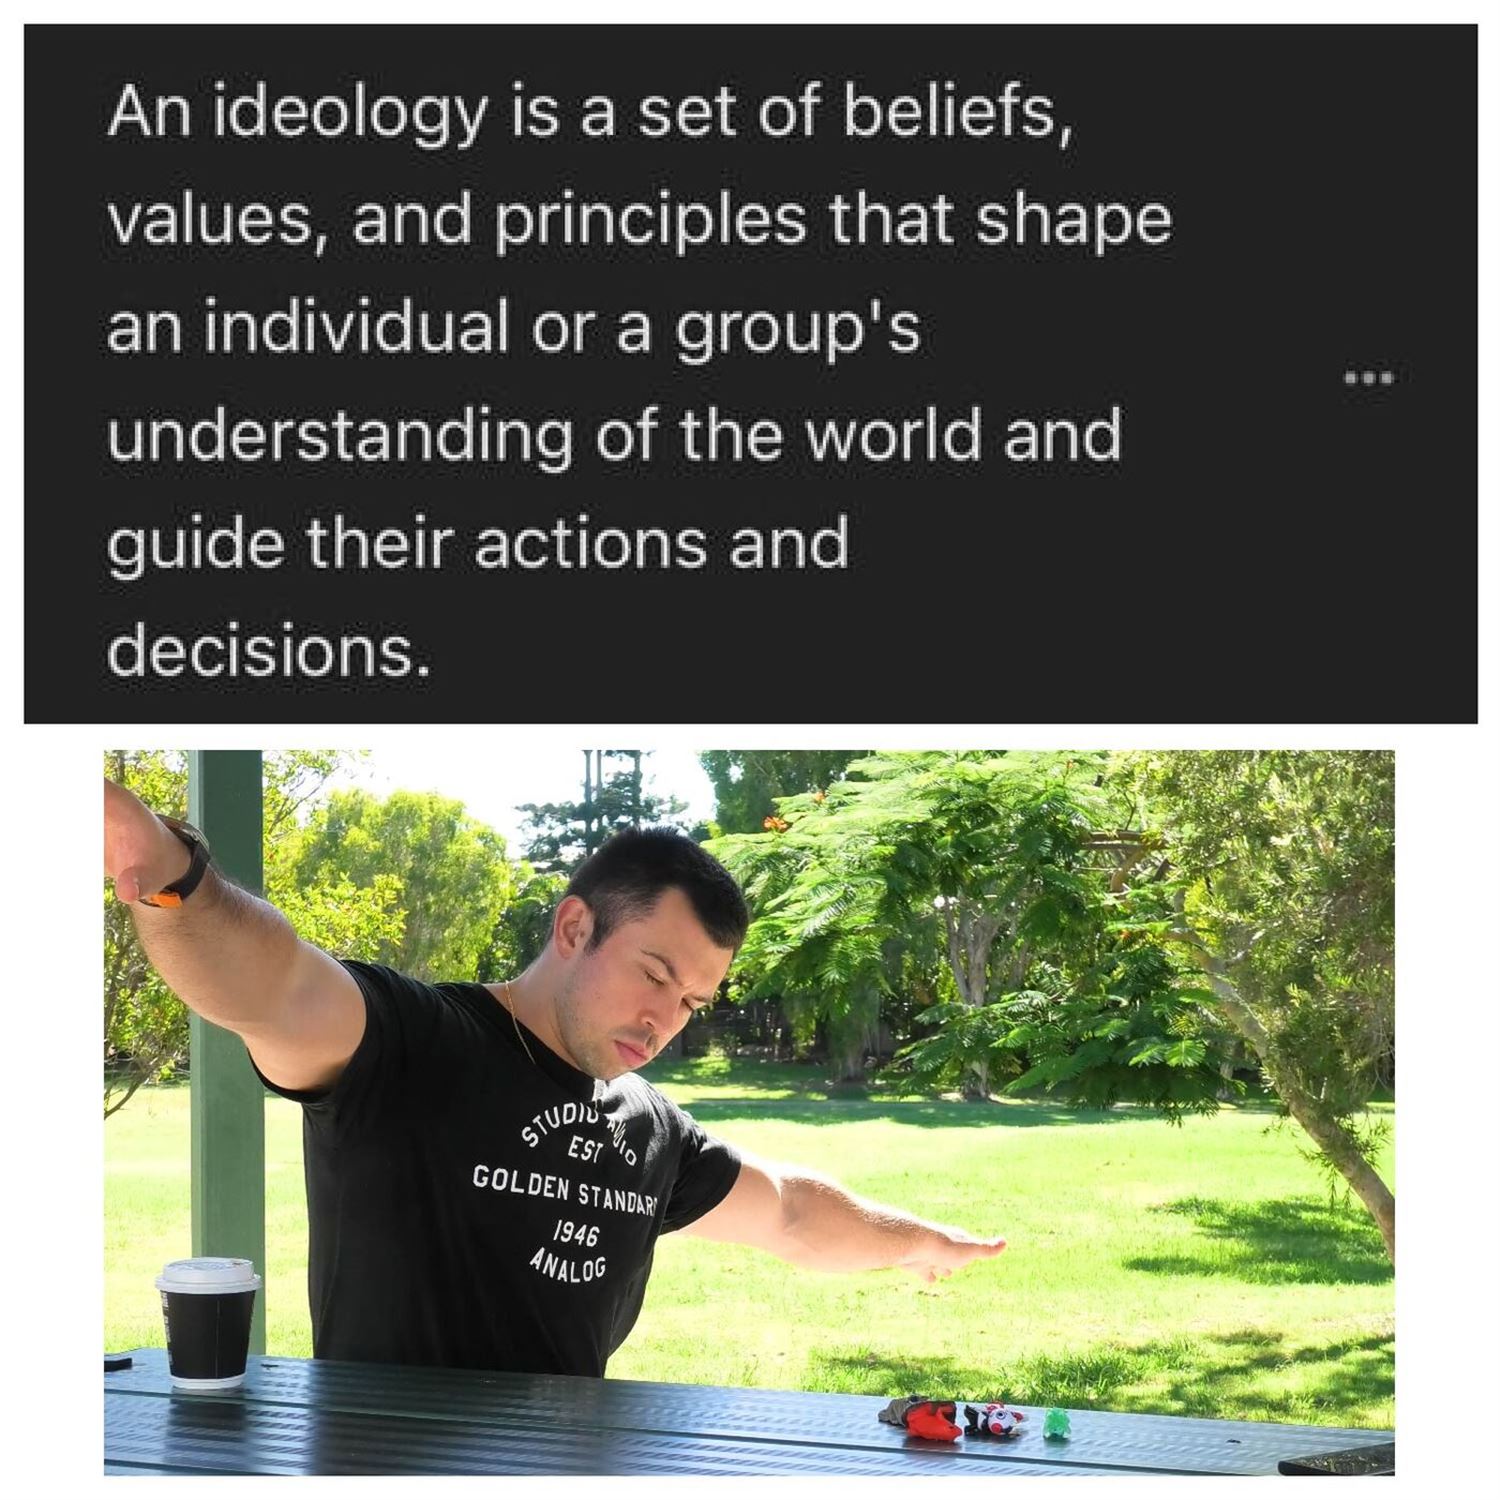 Beliefs and logic